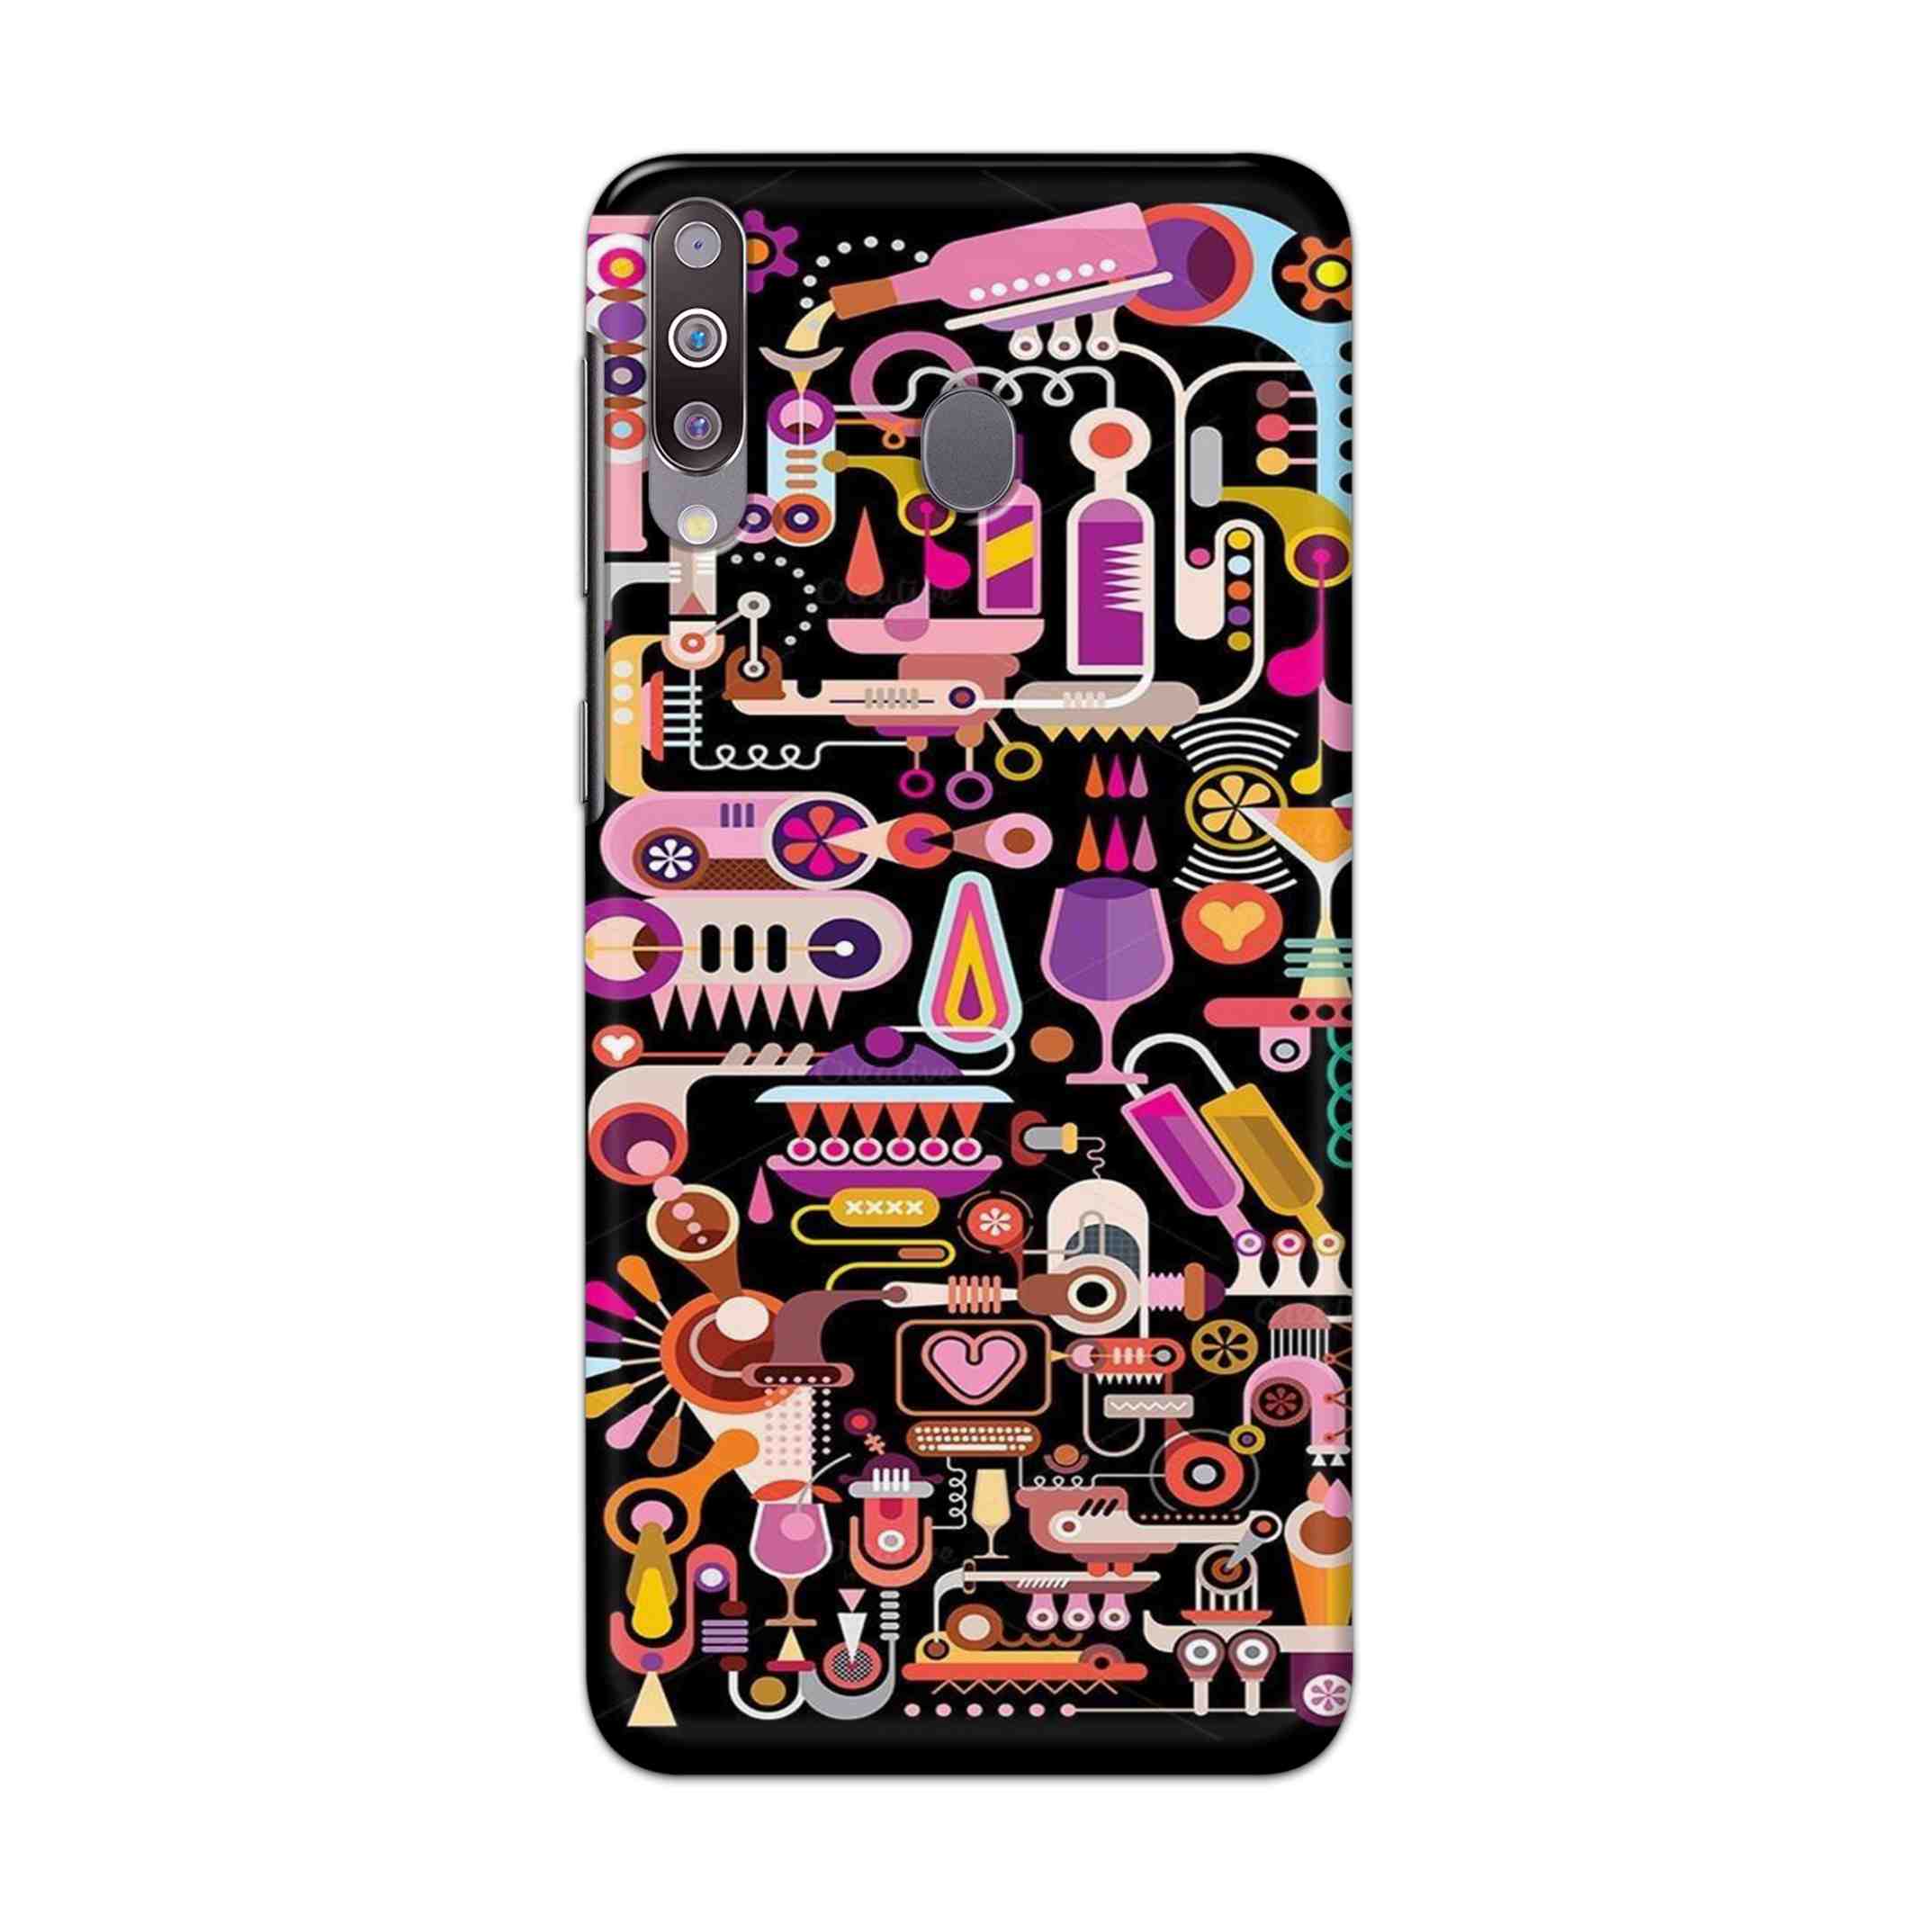 Buy Lab Art Hard Back Mobile Phone Case Cover For Samsung Galaxy M30 Online